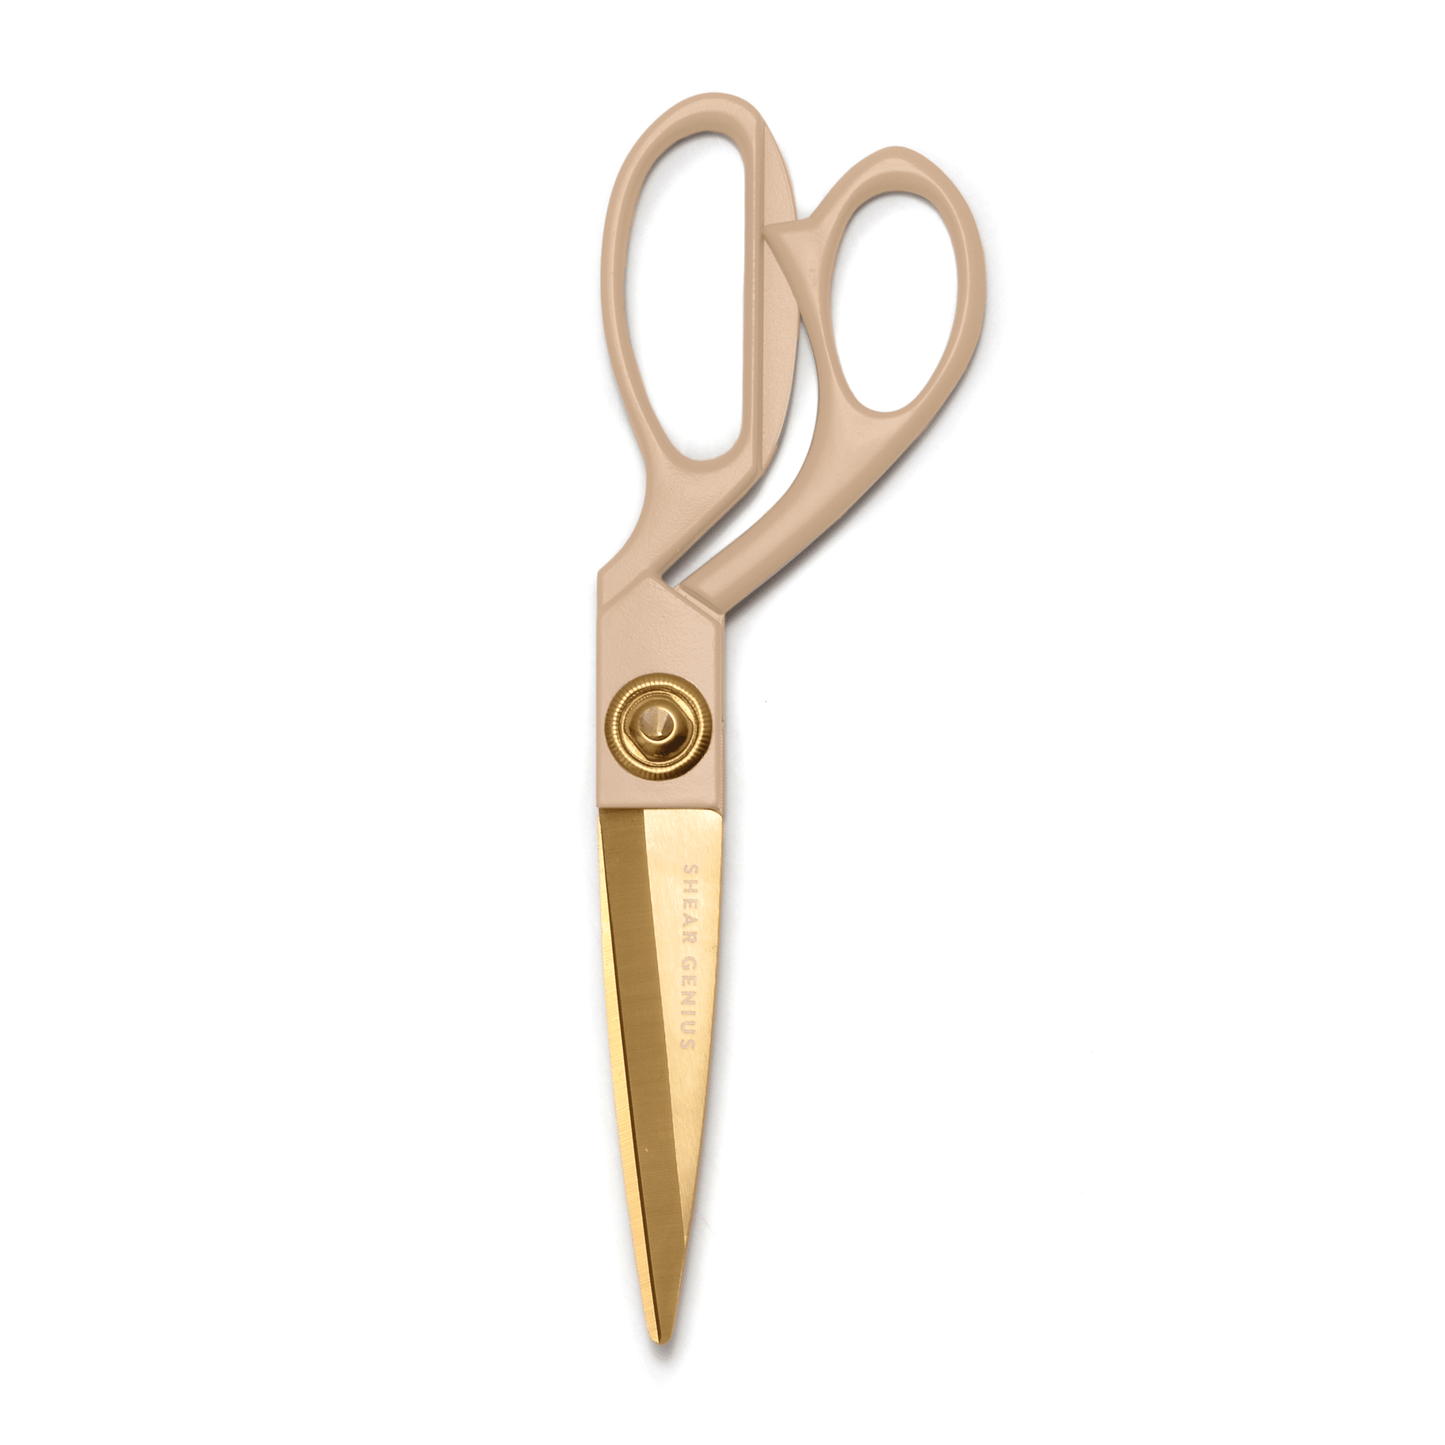 The Good Scissors - Taupe on a white background. 